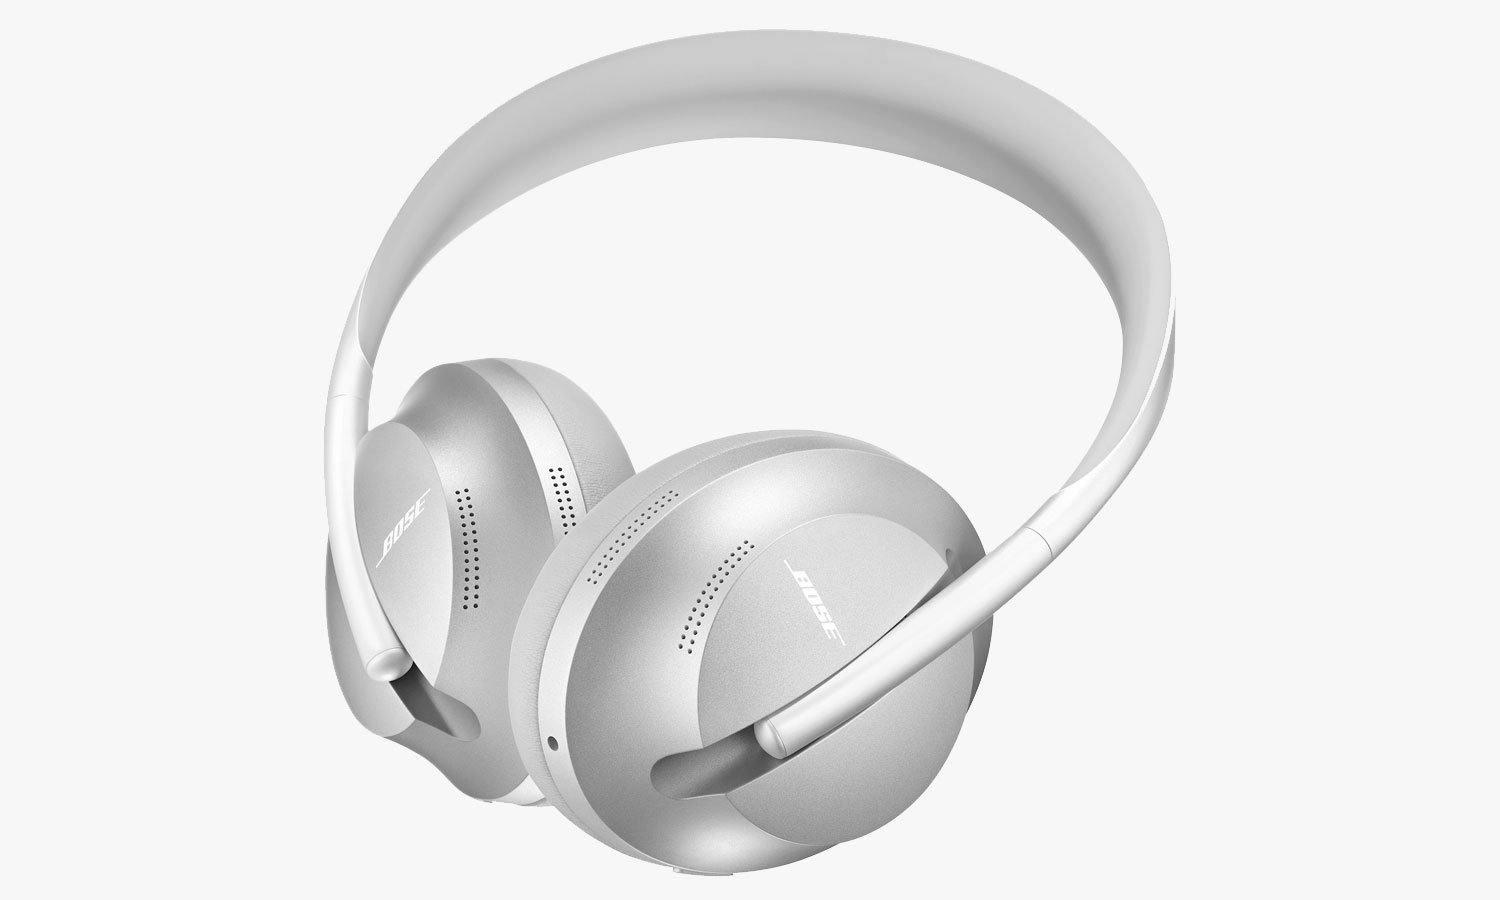 Bose Makes the Smartest Noise Cancelling Headphones